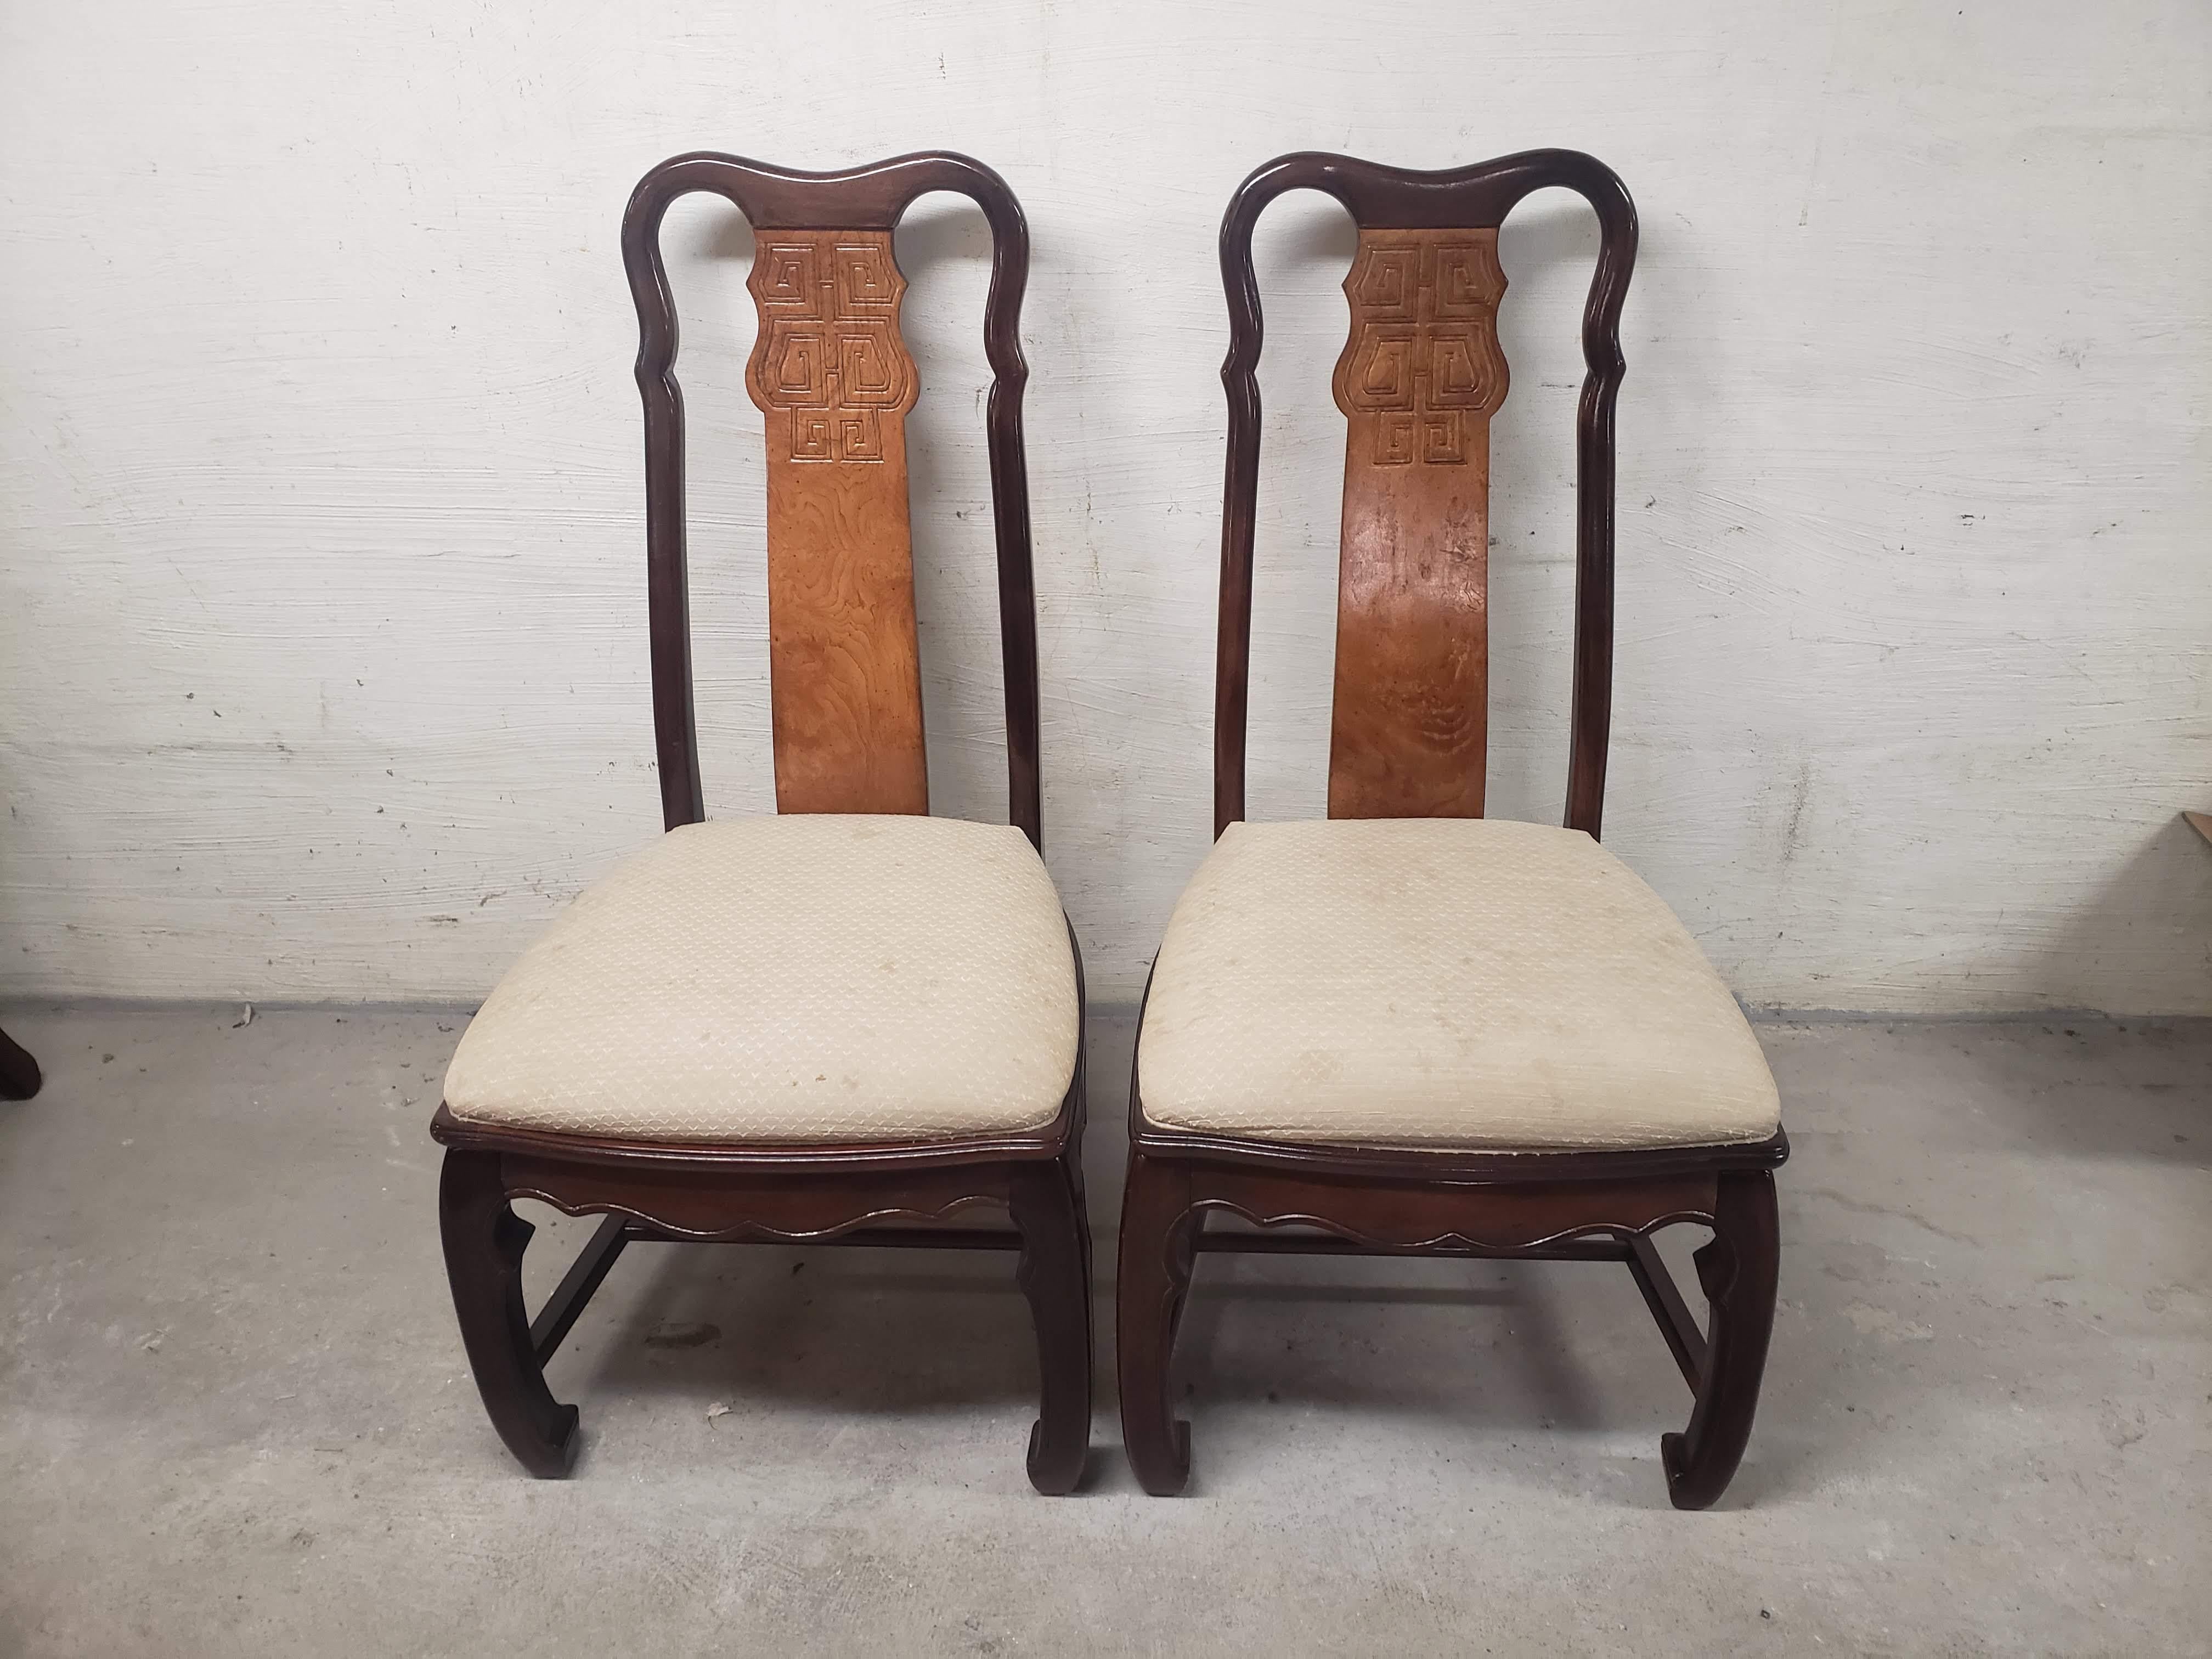 Your chance to own a rare set of Century Furniture Dining Chairs. This style is a more modern version of the Century Furniture Chin Hua by Raymond Sobota dining chairs available from other sellers. Chairs are made of burl wood and finished with a